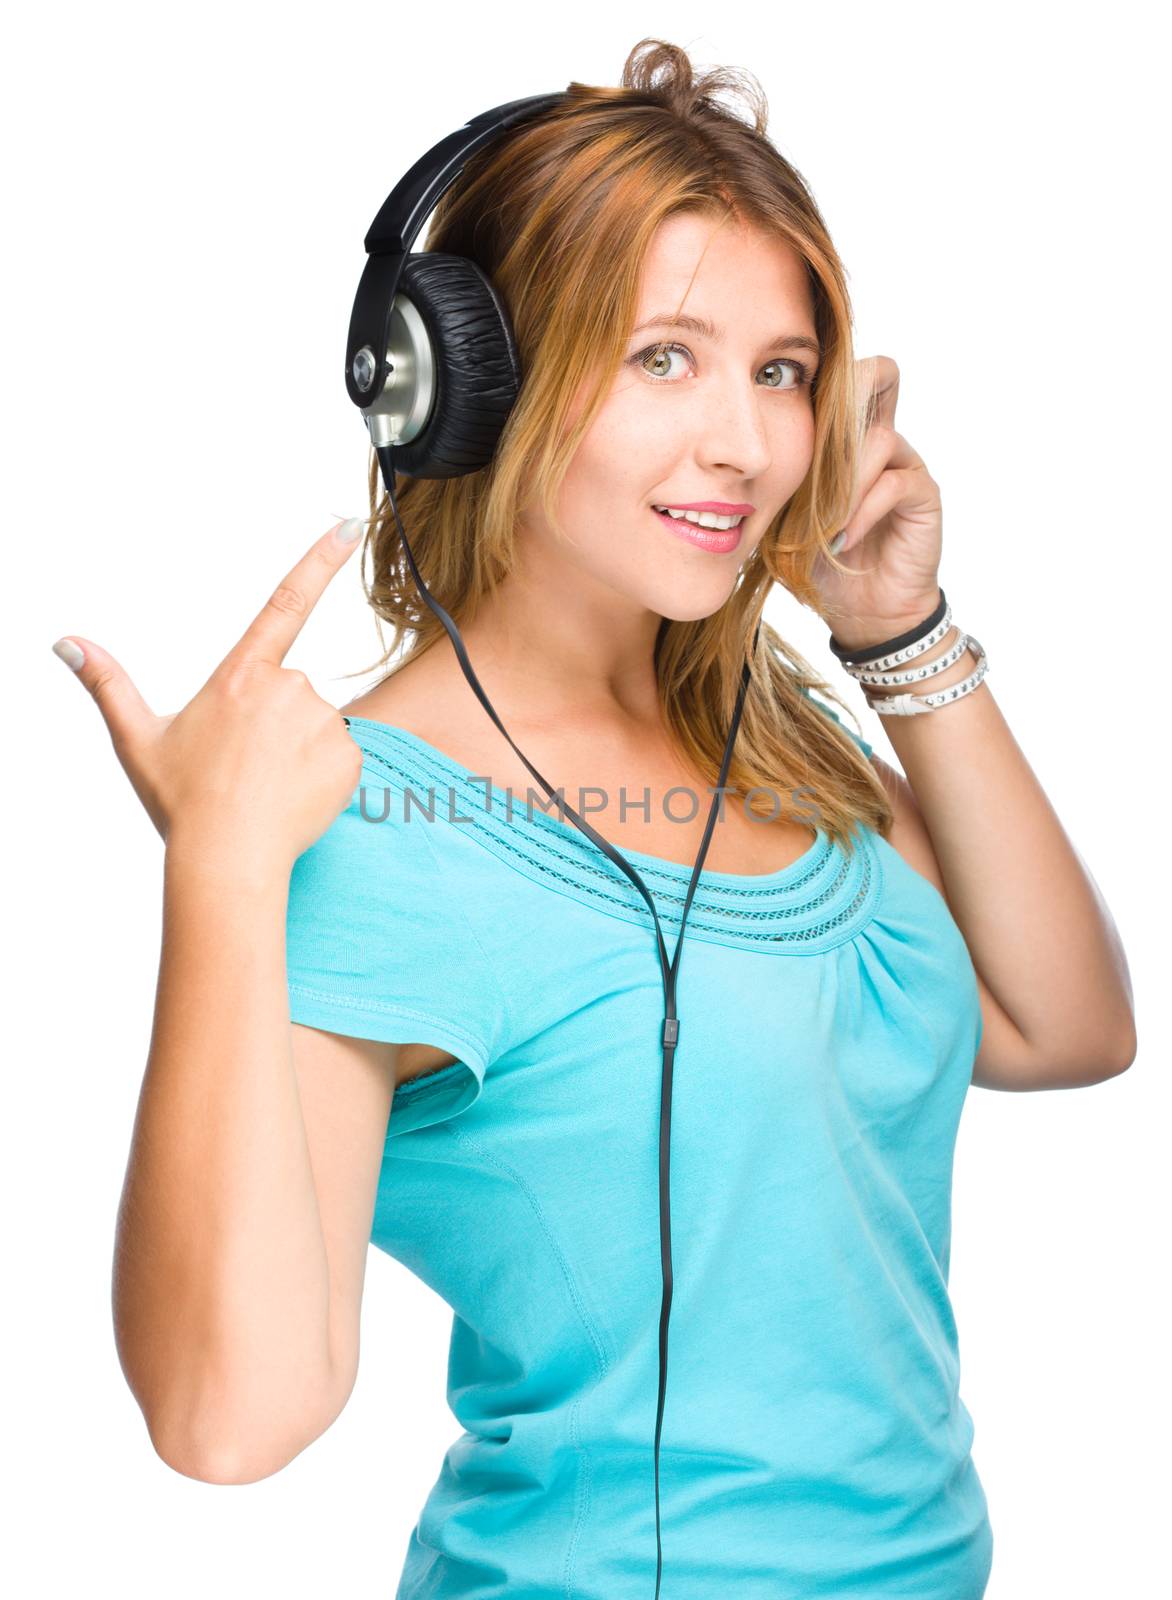 music and technology concept - young woman listening to music and show on her headphones, isolated on white
 by id7100